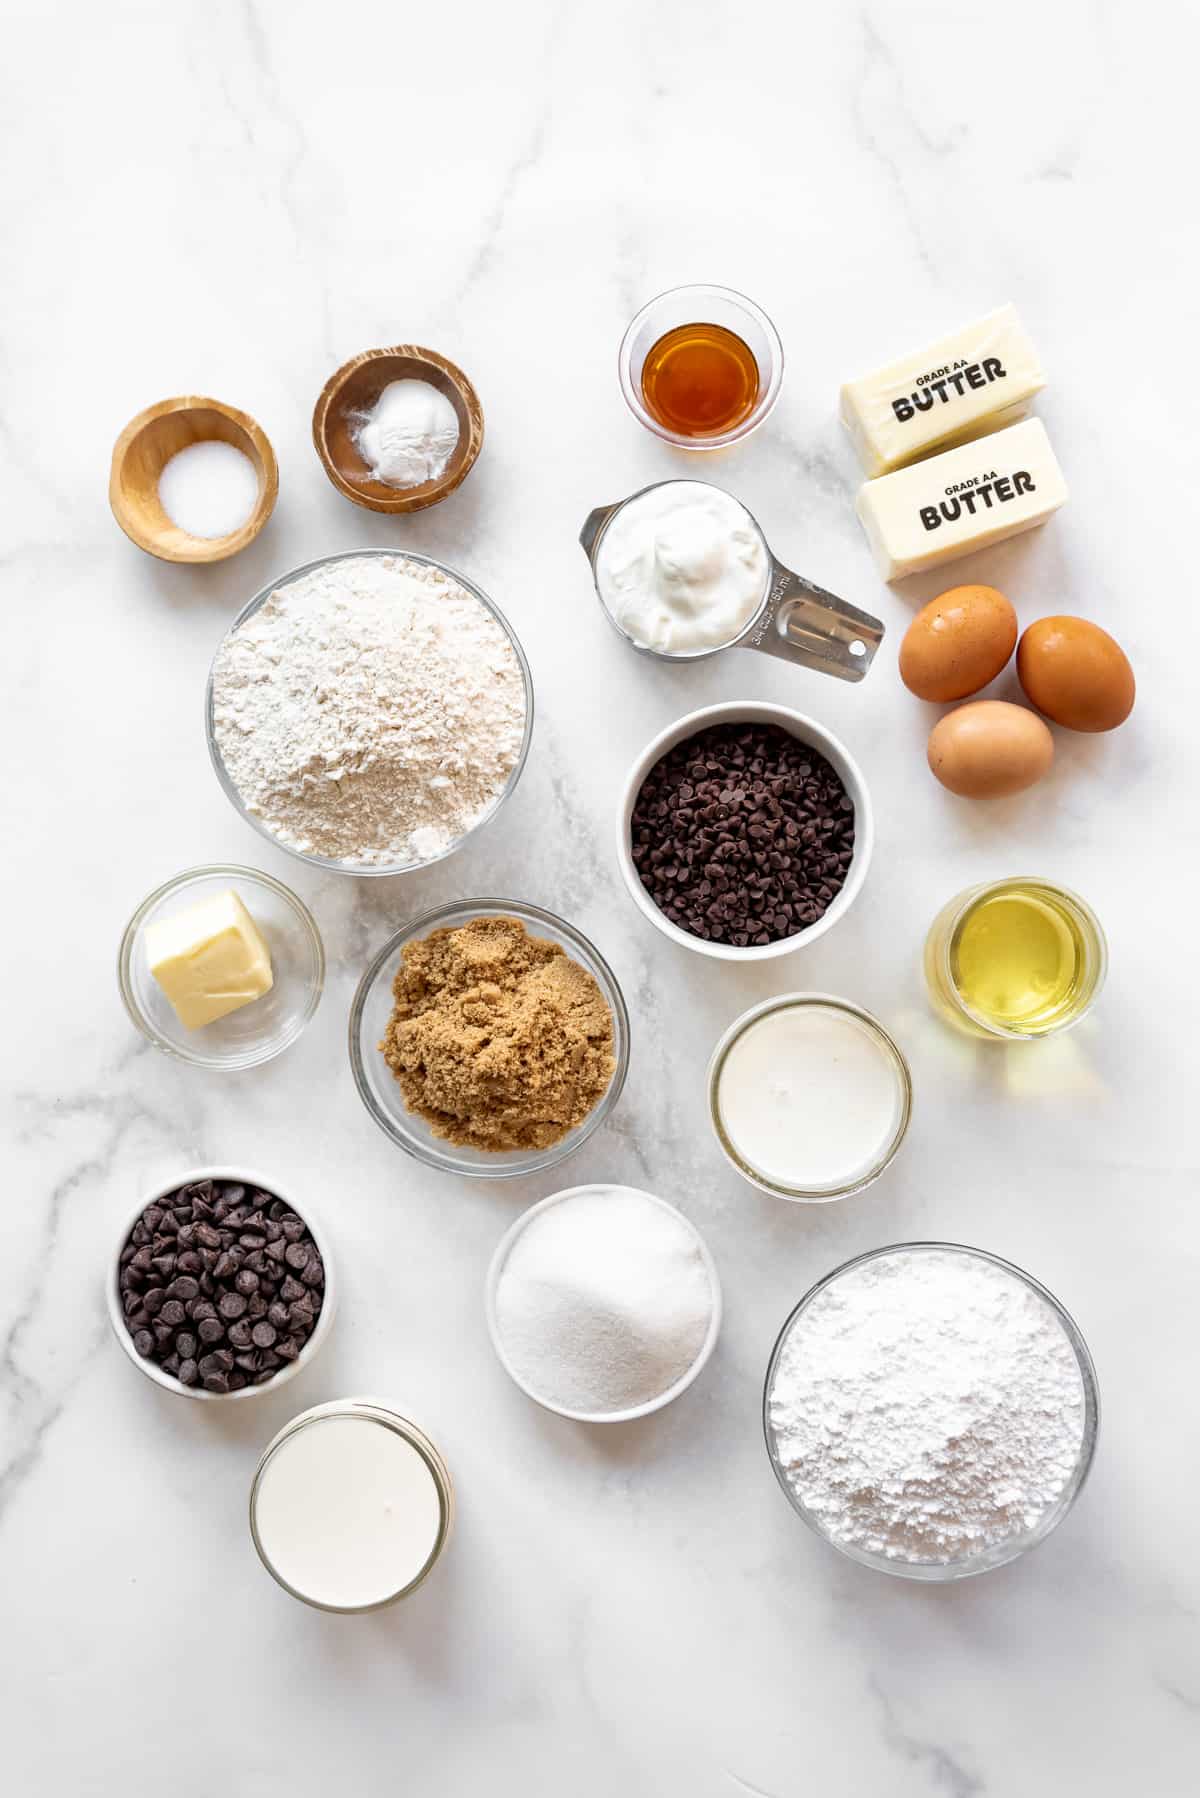 Ingredients in separate bowls on a white marble surface for making chocolate chip cookie dough cake.